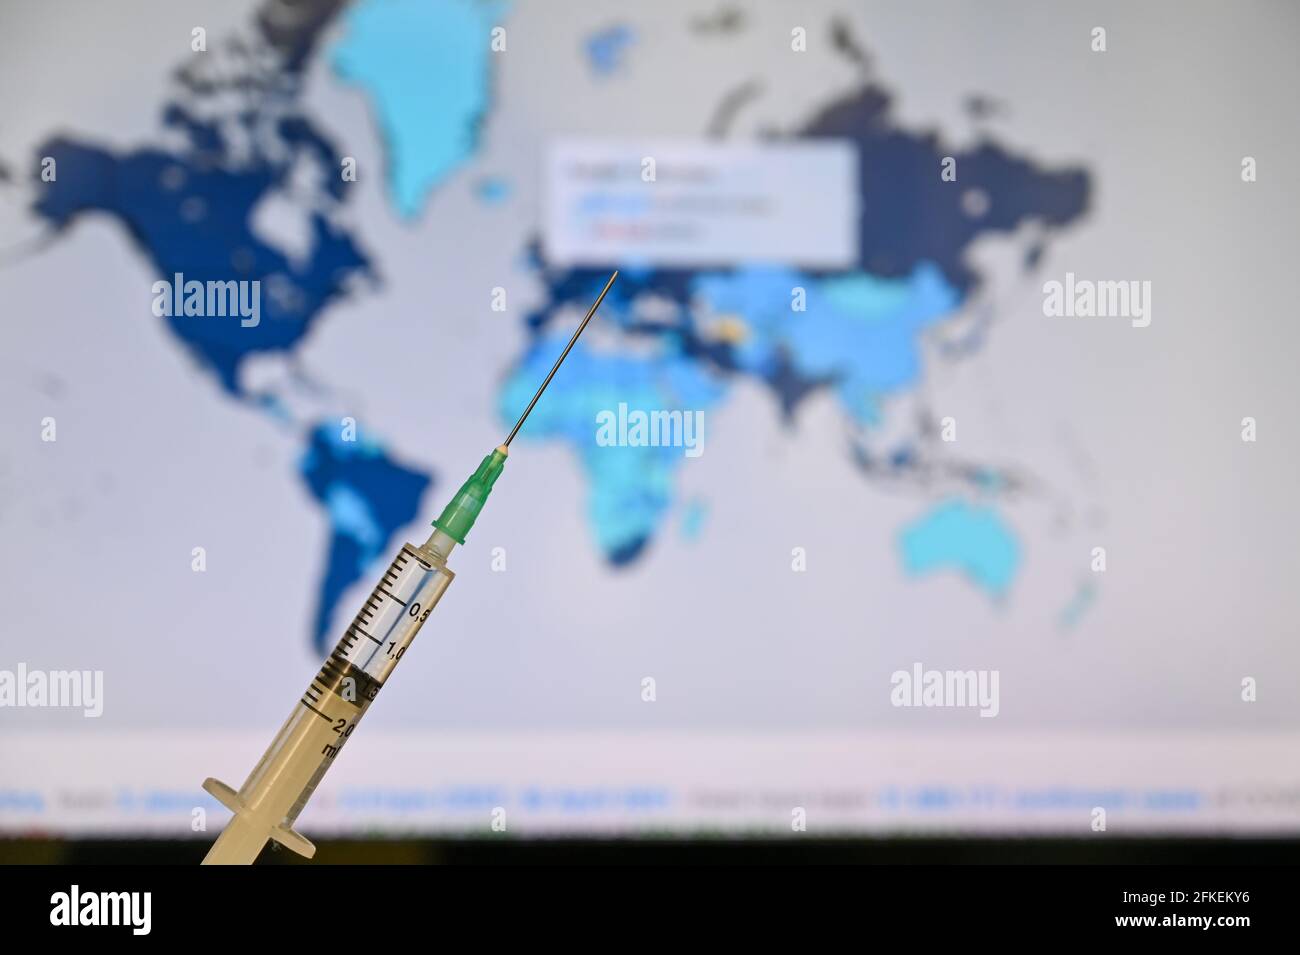 Syringe with world map background. Covid 19 vaccine is popular trend of world agenda Stock Photo